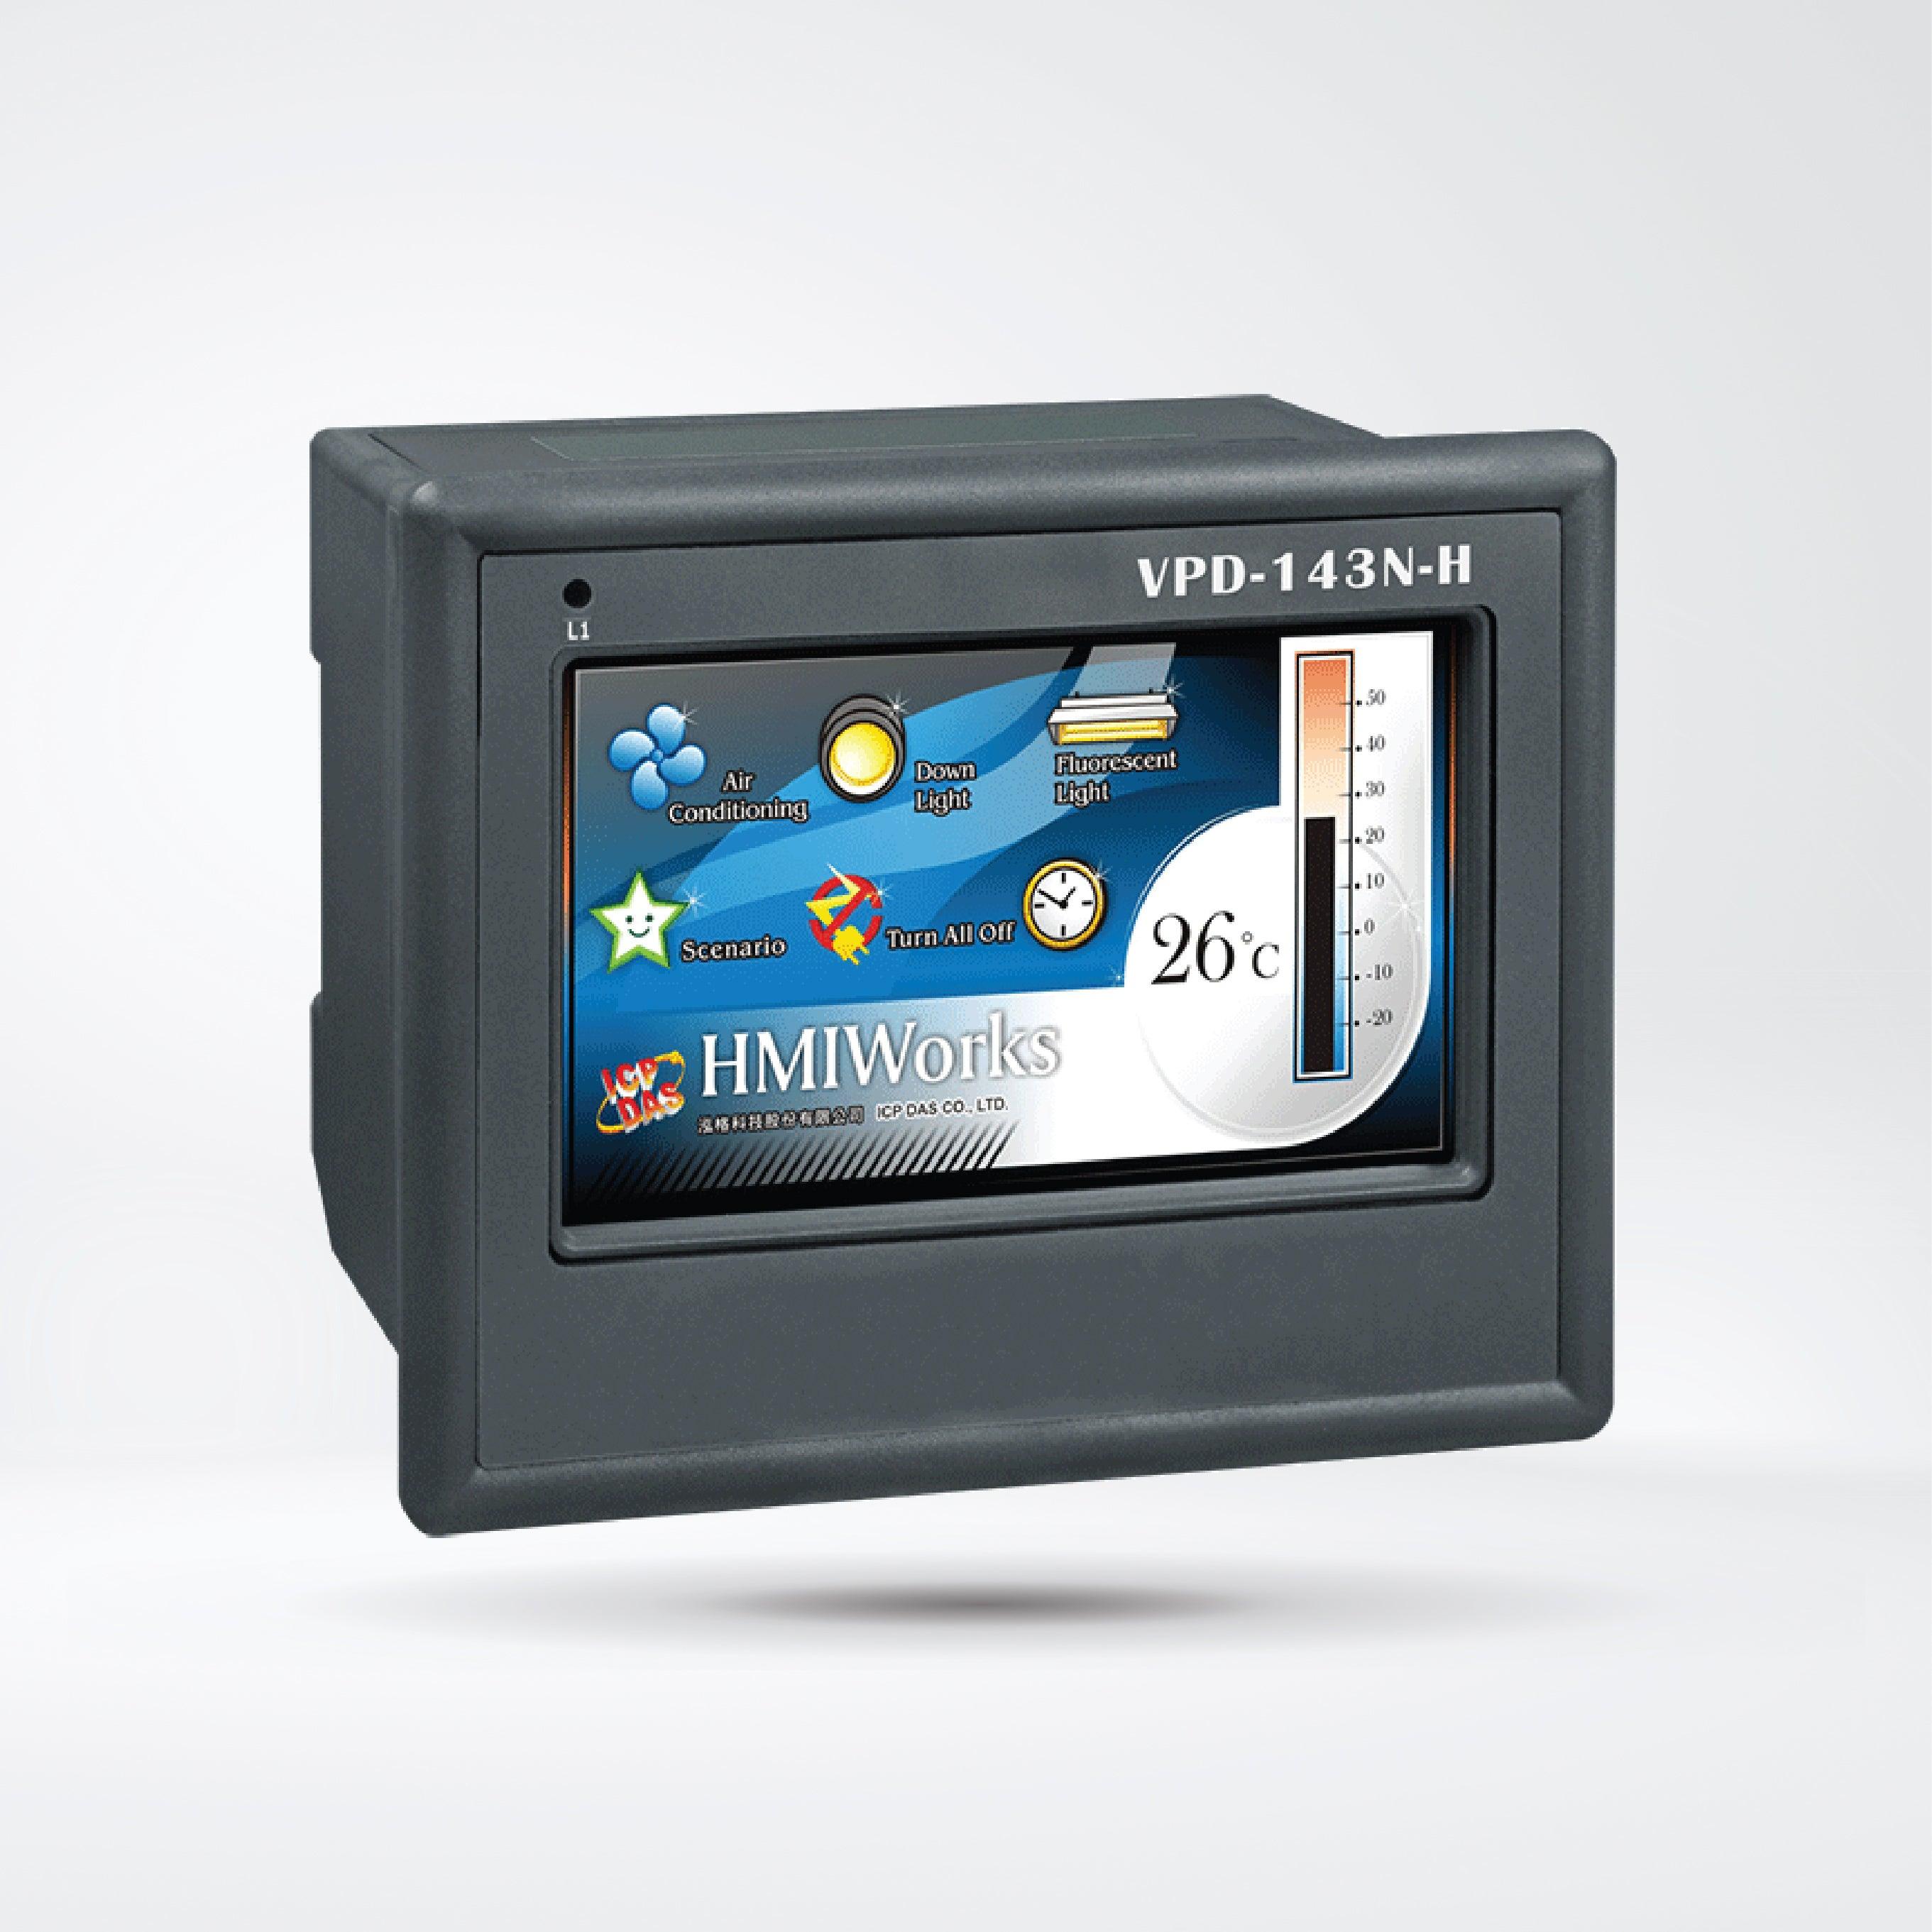 VPD-143N-H 4.3" Touch HMI Device with 2 x RS-232/RS-485, Ethernet (PoE) - Riverplus